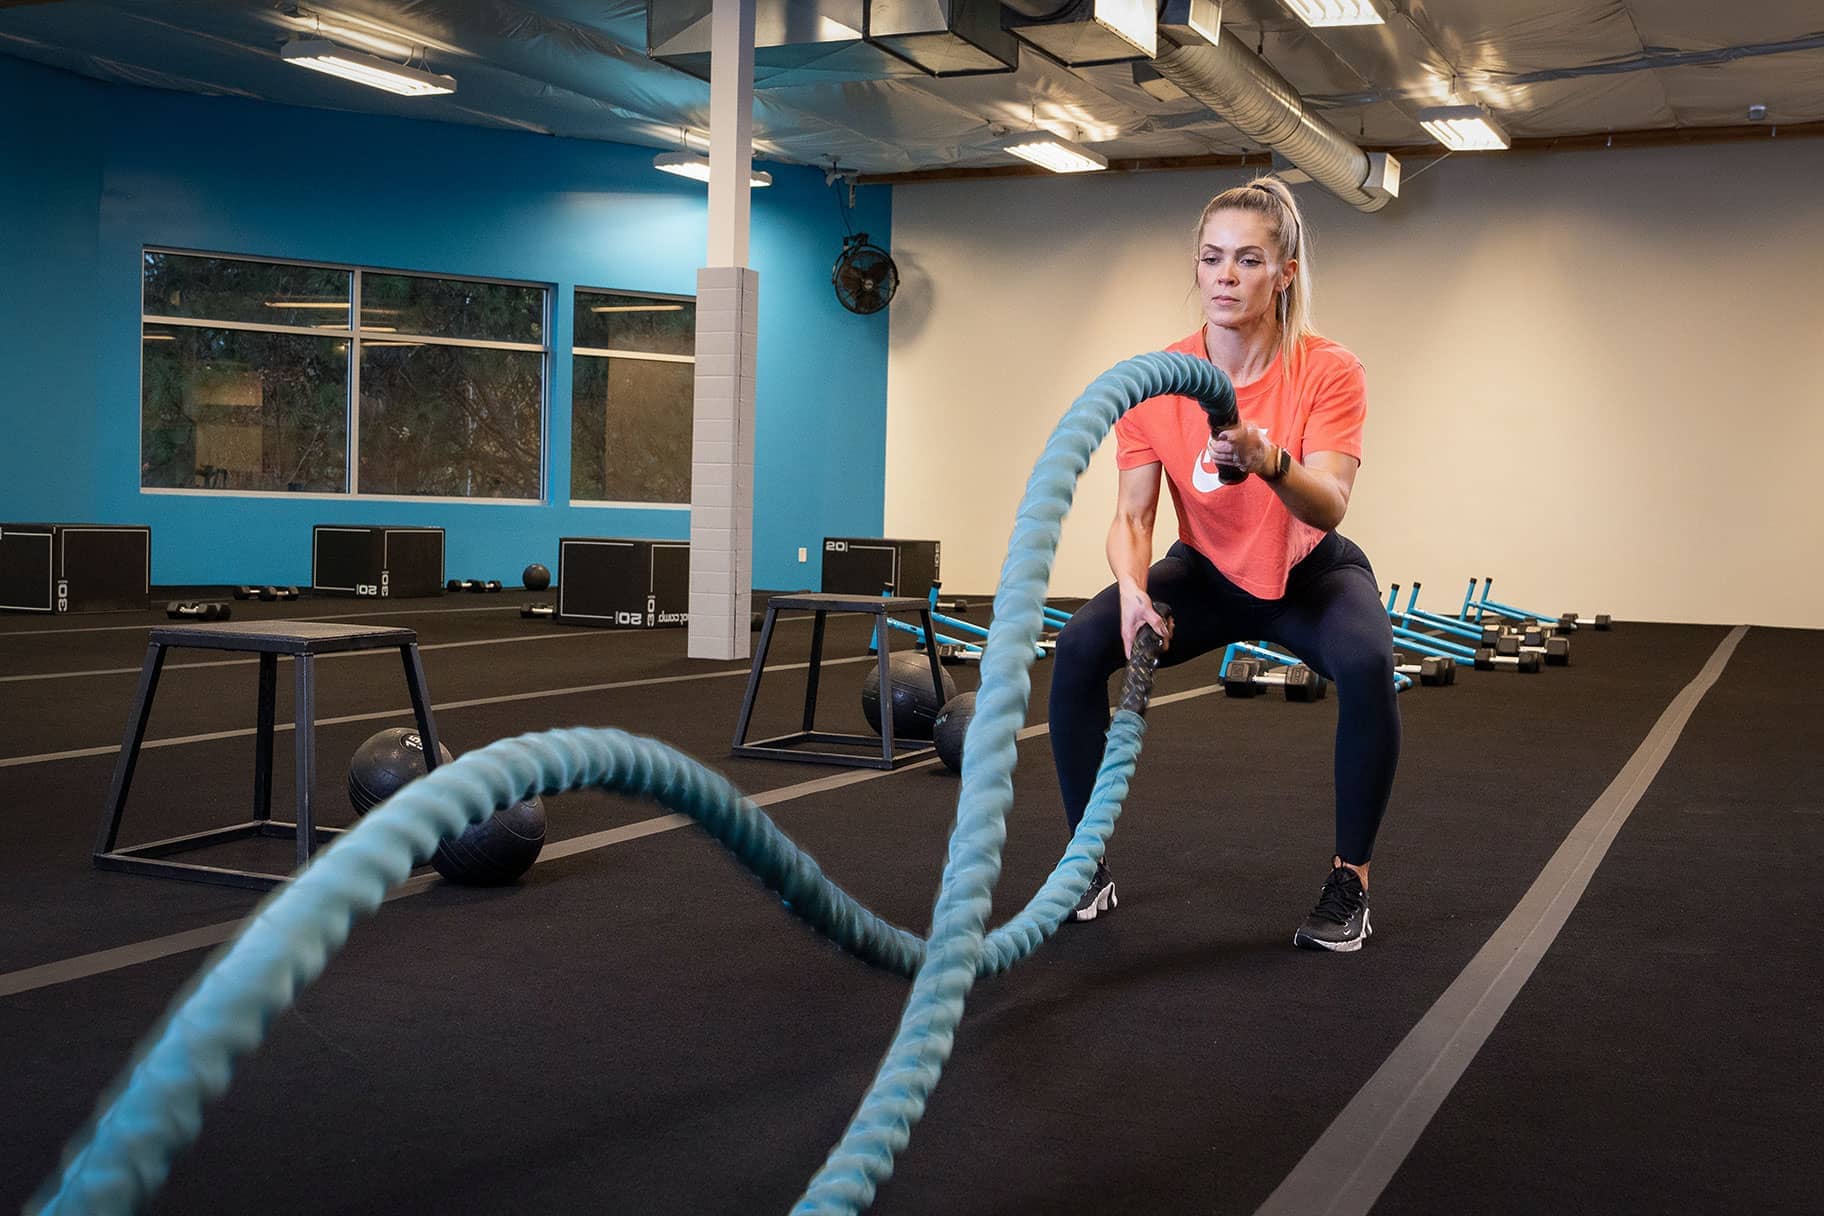 Battle Ropes: What They Are, Their Benefits, and Exercises You Can